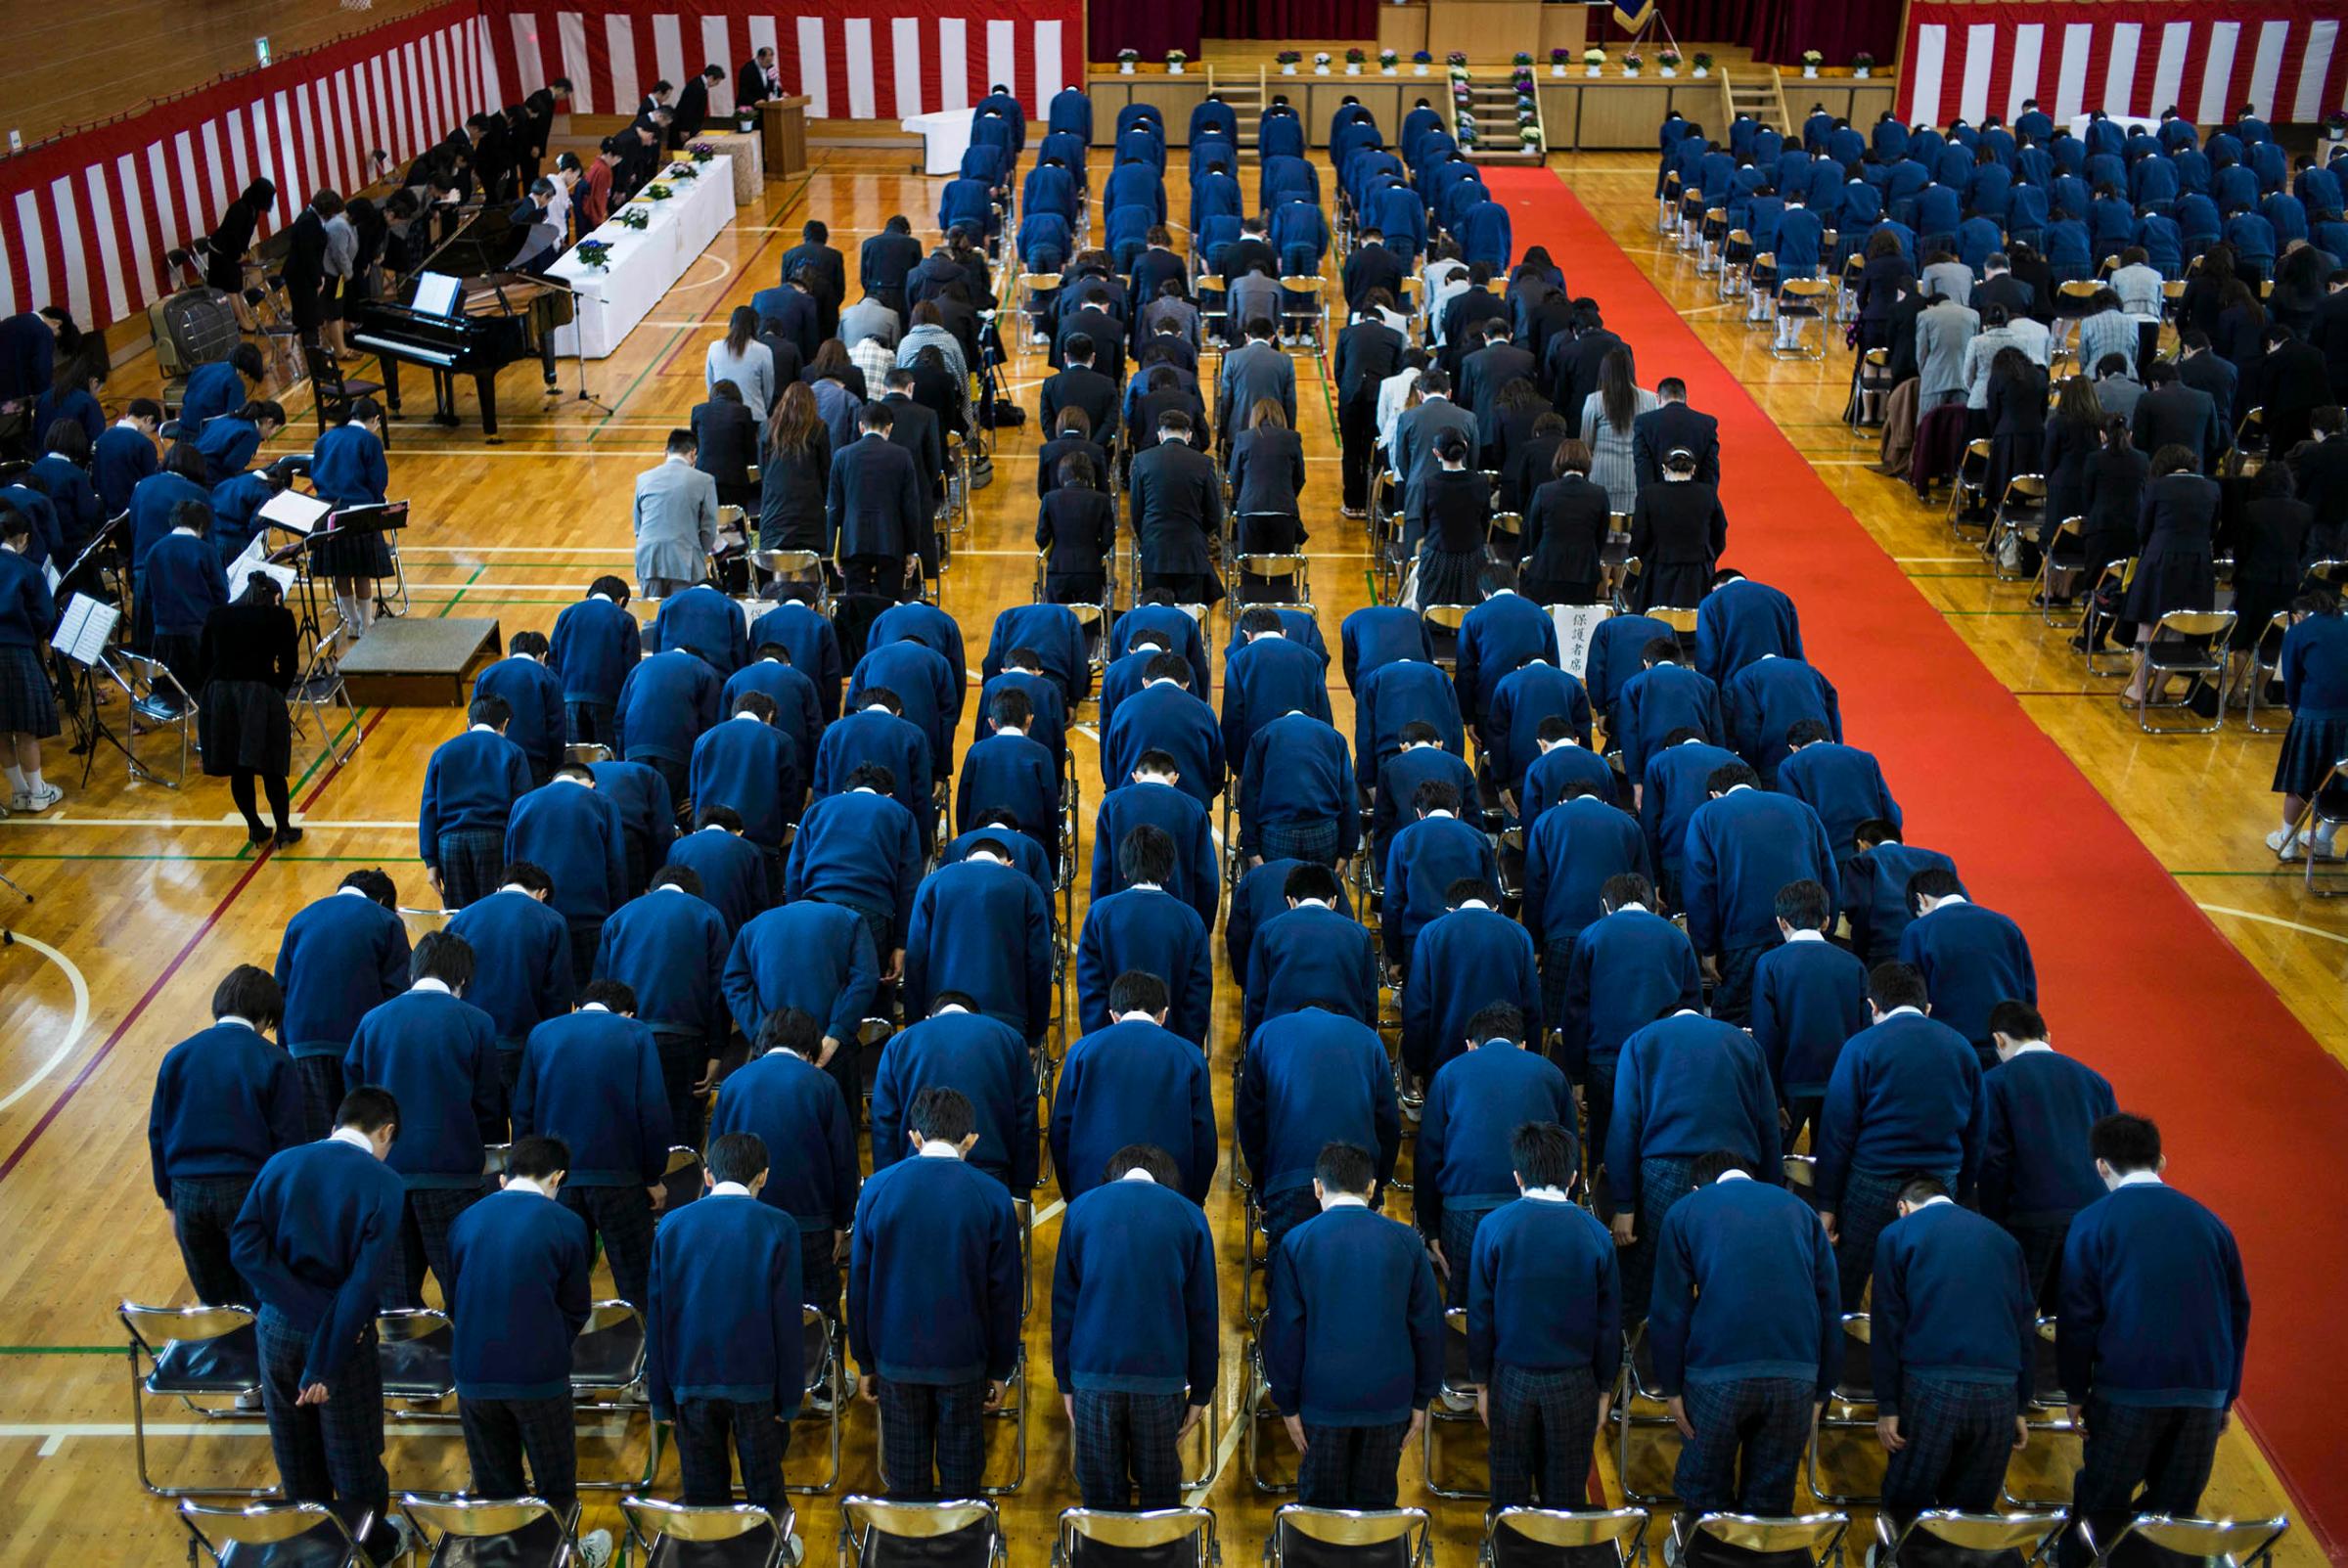 Students in the first rows prepare to graduate from Minamisoma's Ishigami Junior High School on the fifth anniversary of the massive earthquake and tsunami that struck the northeastern coast of Japan, damaging the Fukushima Daiichi nuclear power plant 25km away.